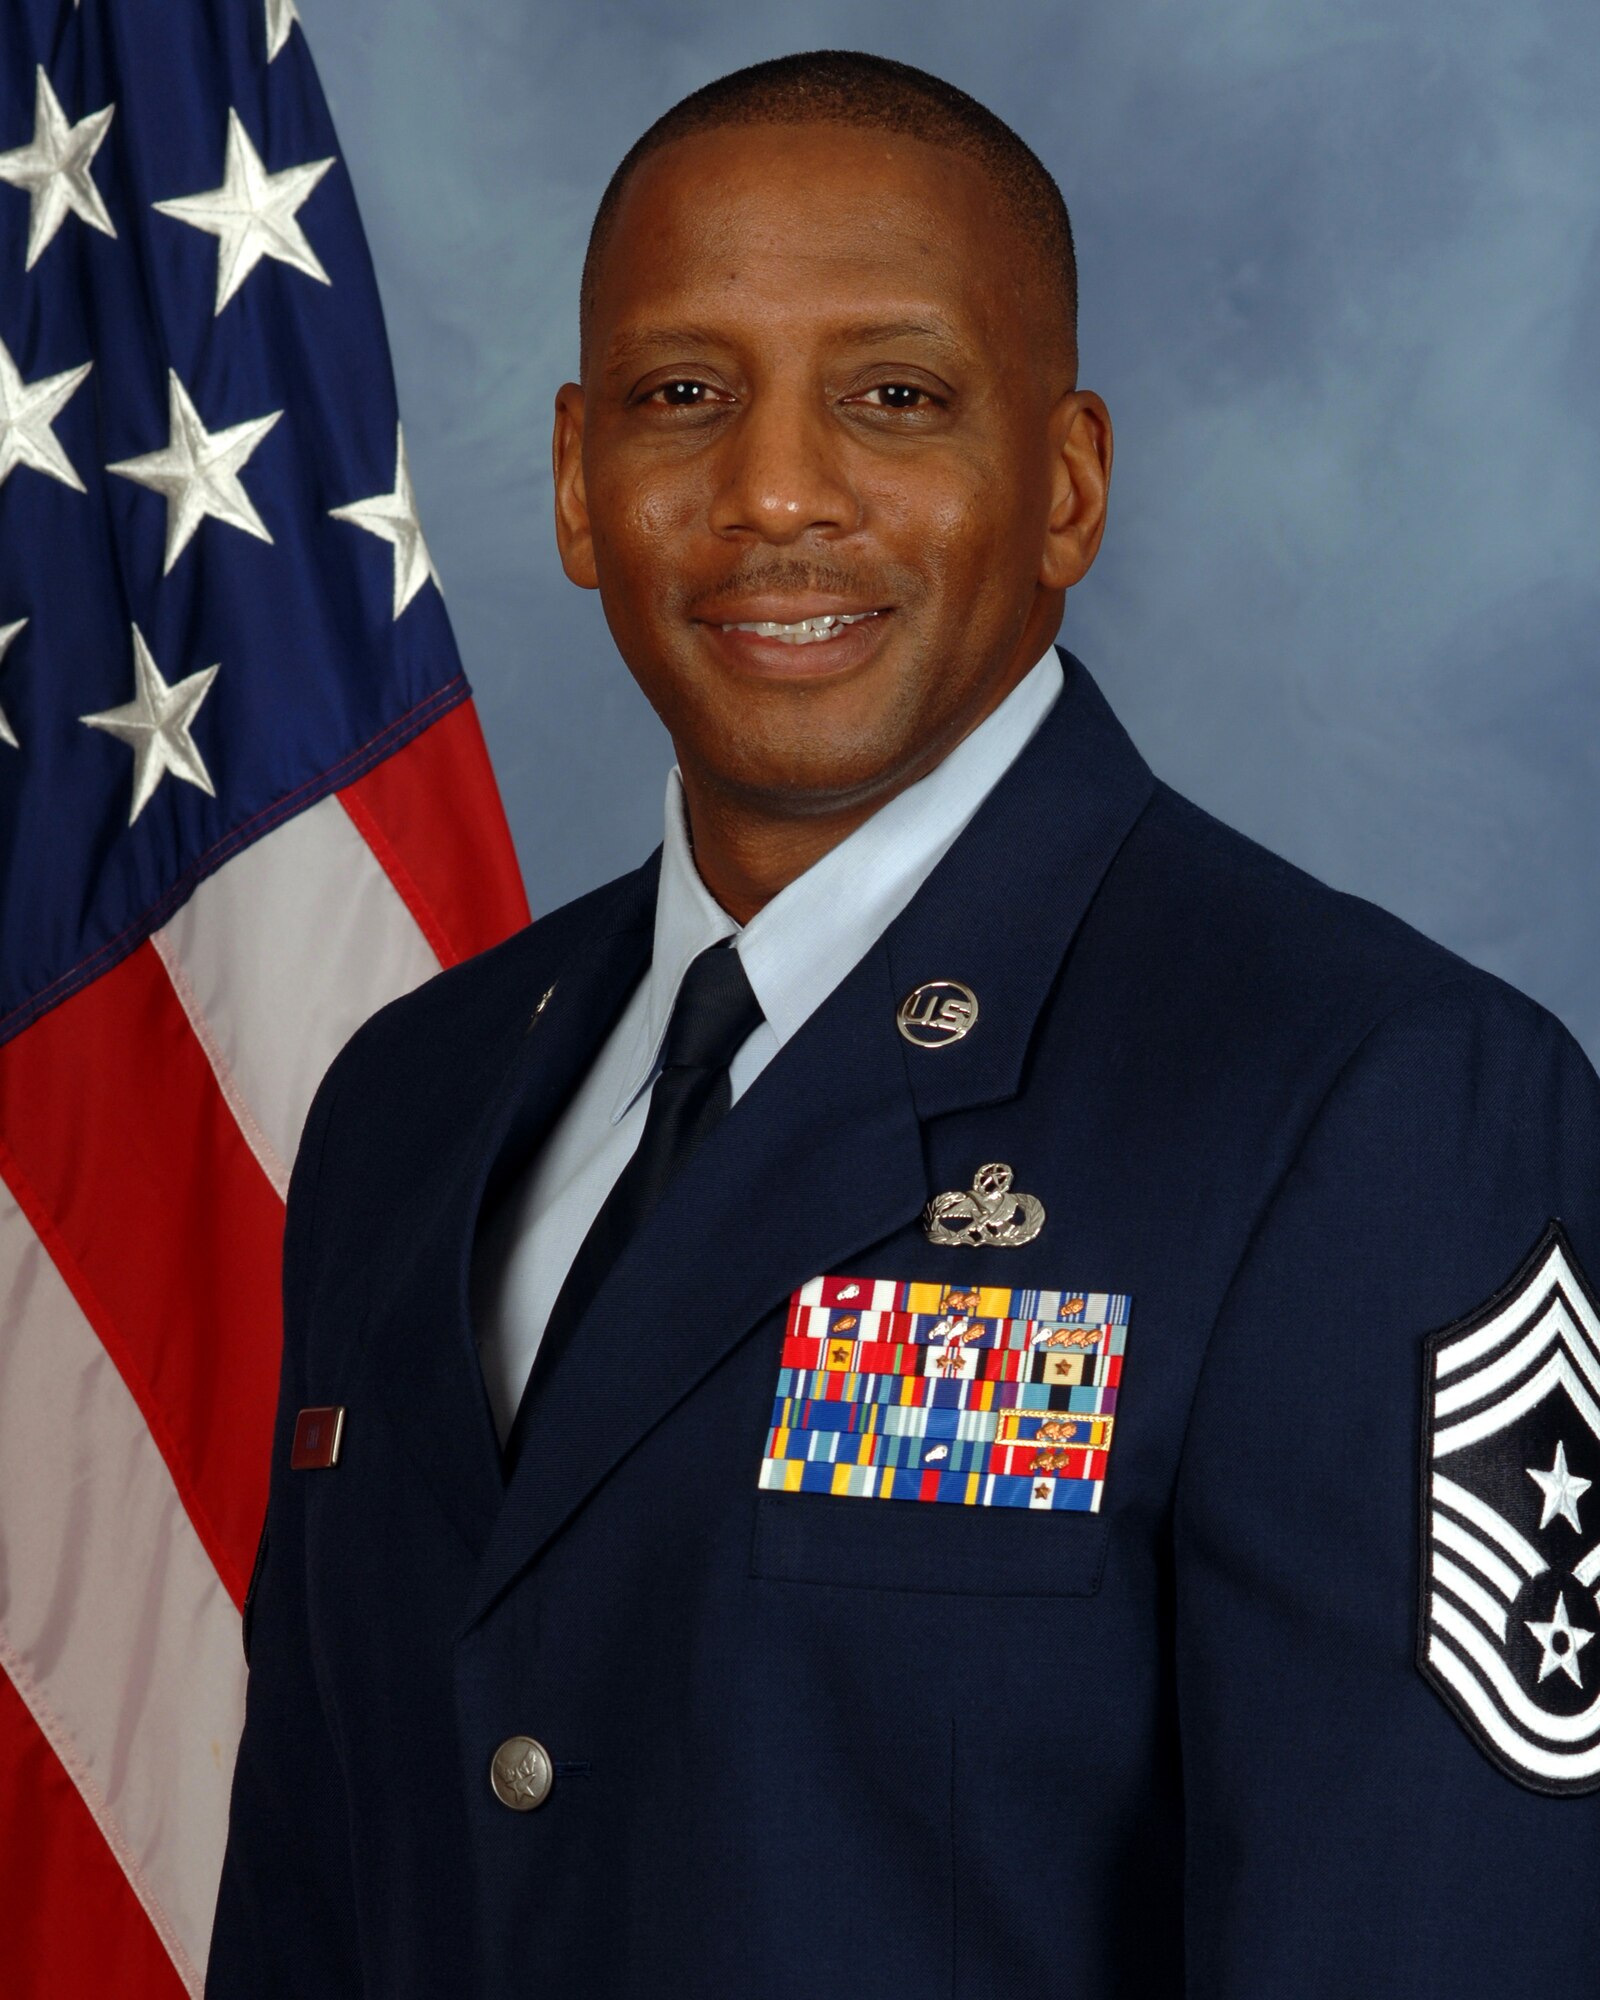 Chief Master Sergeant Michael Cole, Command Chief Master Sergeant of the 15th Wing, Joint Base Pearl Harbor-Hickam, Hawaii. Official Photo